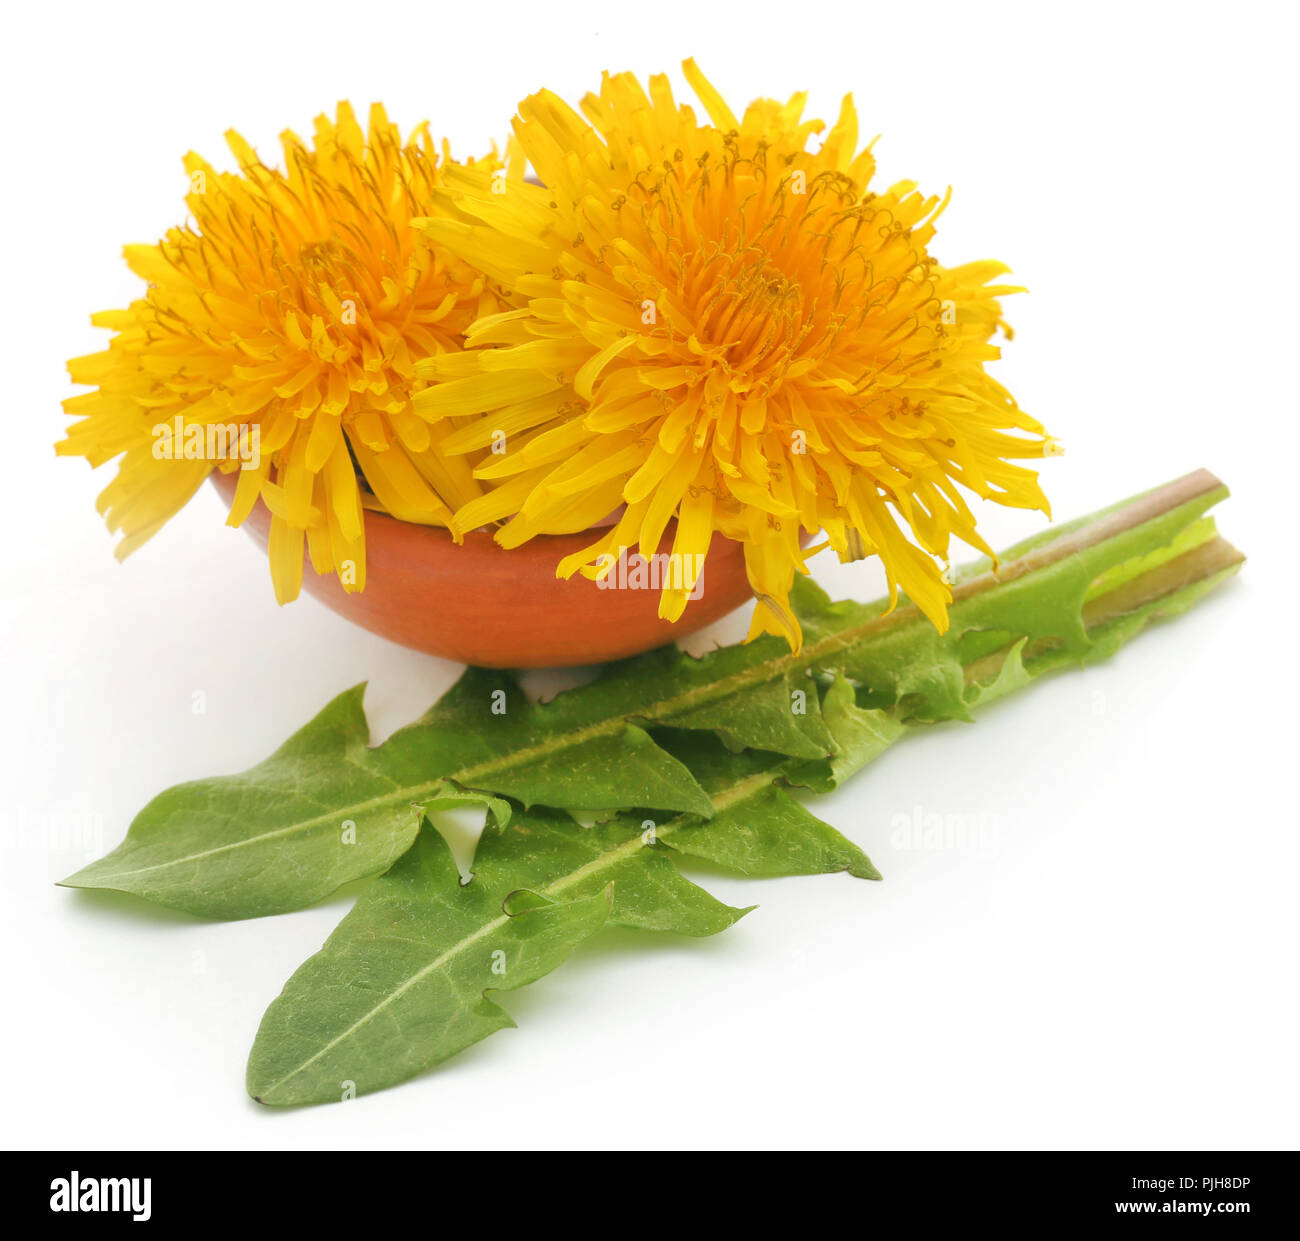 Medicinal dandelion with green leaves over white background Stock Photo